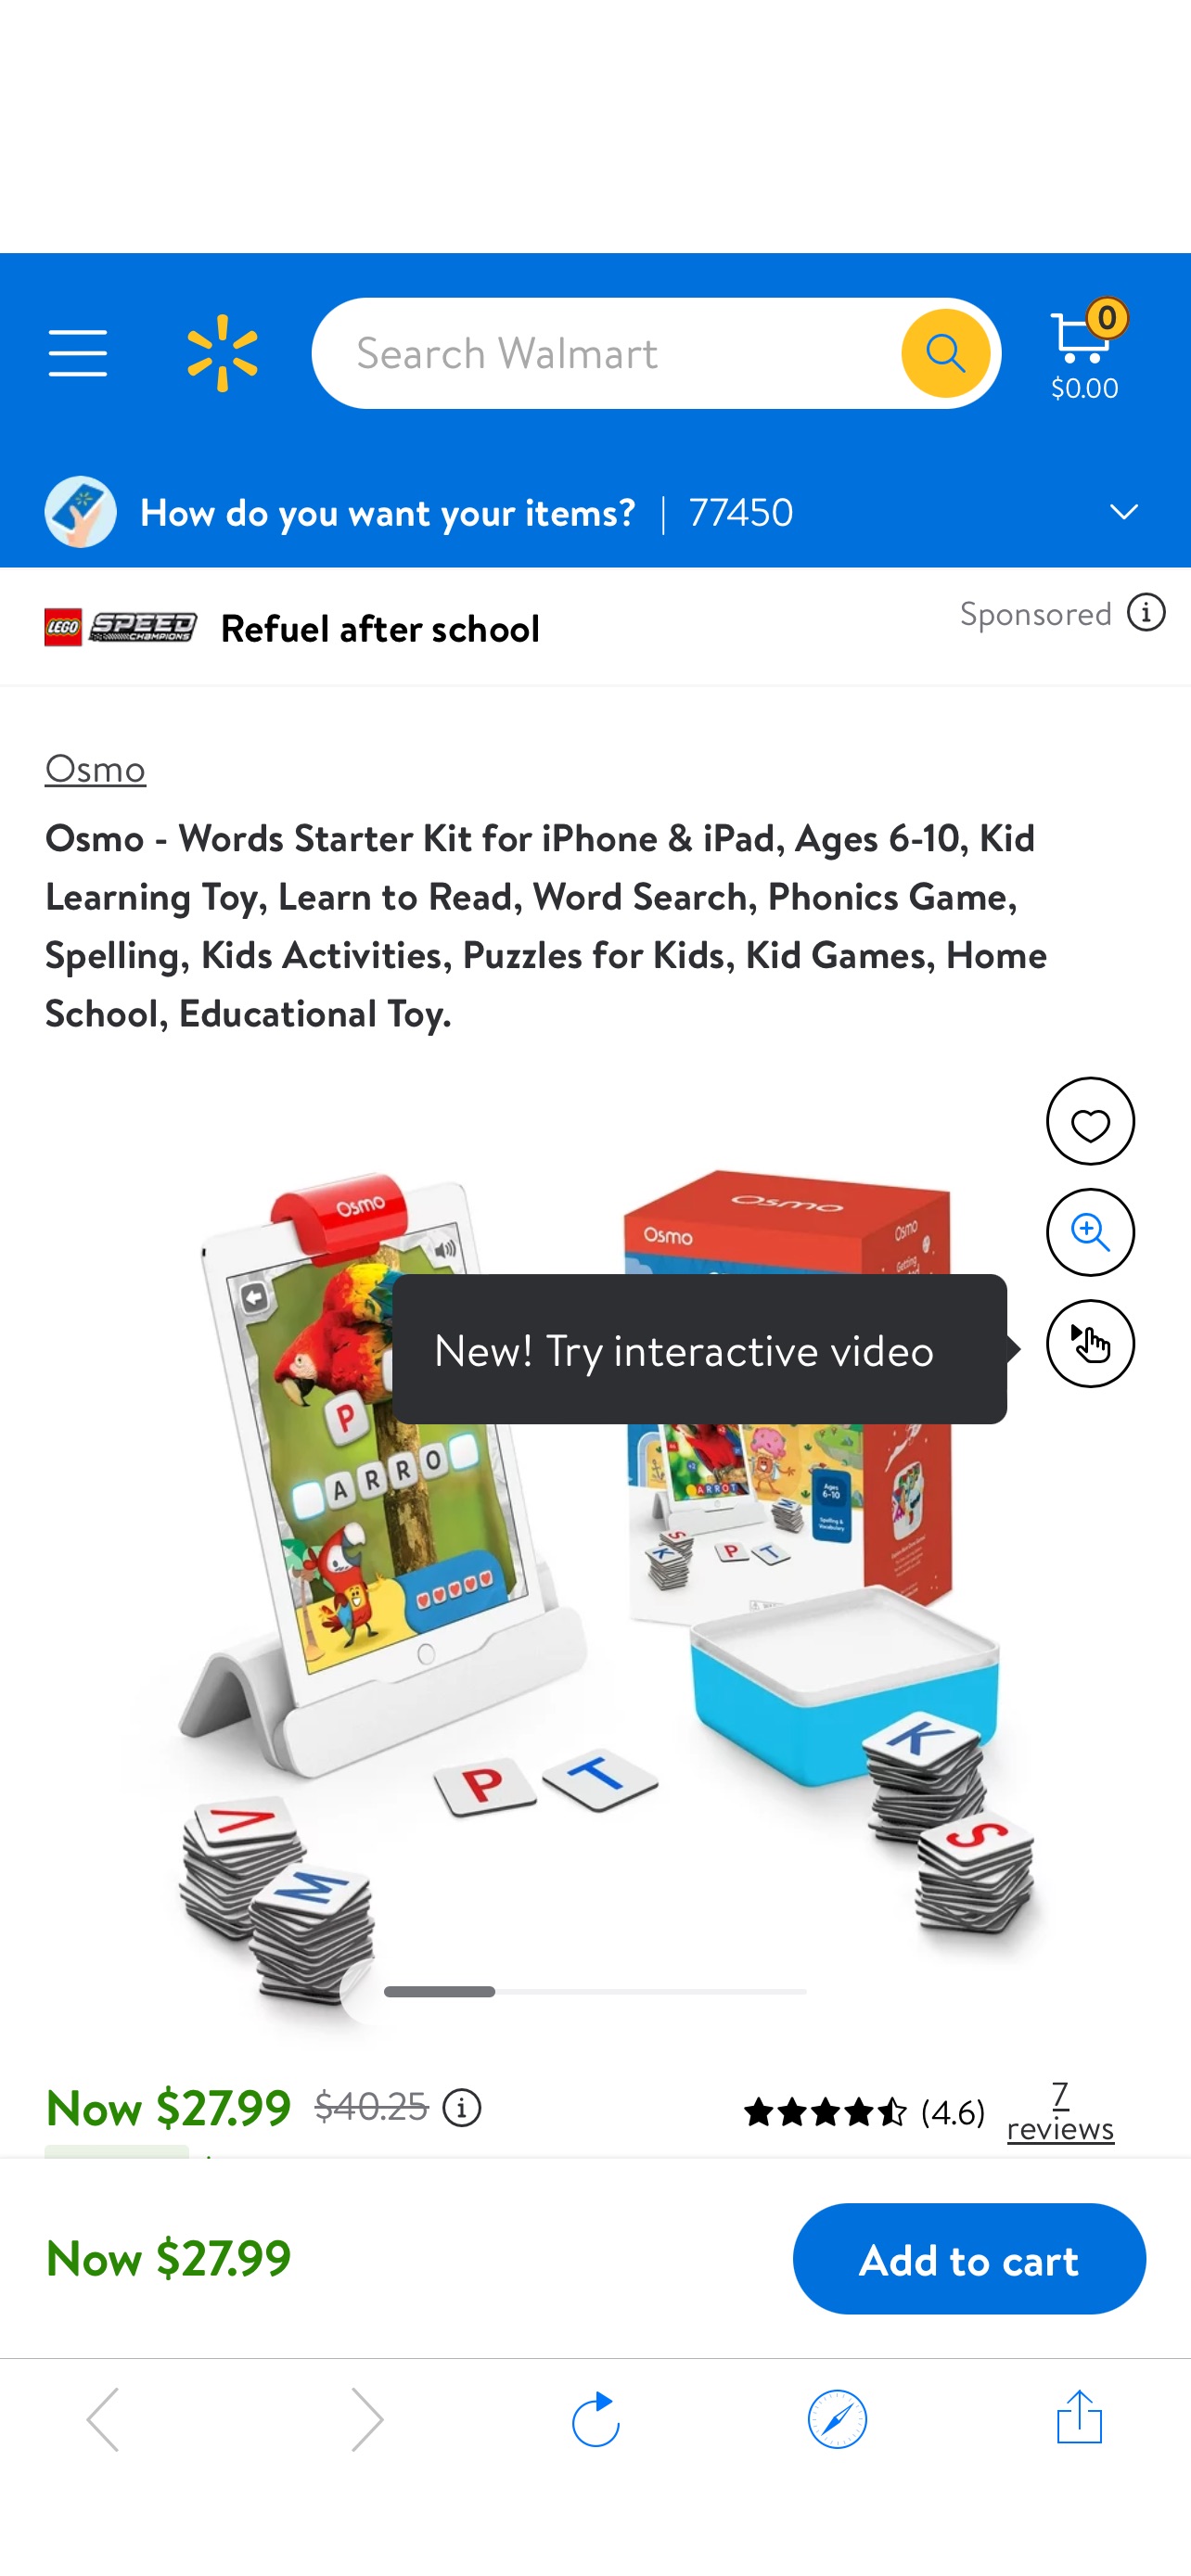 Osmo - Words Starter Kit for iPhone & iPad, Ages 6-10, Kid Learning Toy, Learn to Read, Word Search, Phonics Game, Spelling, Kids Activities, Puzzles for Kids, Kid Games, Home School, Educational Toy.